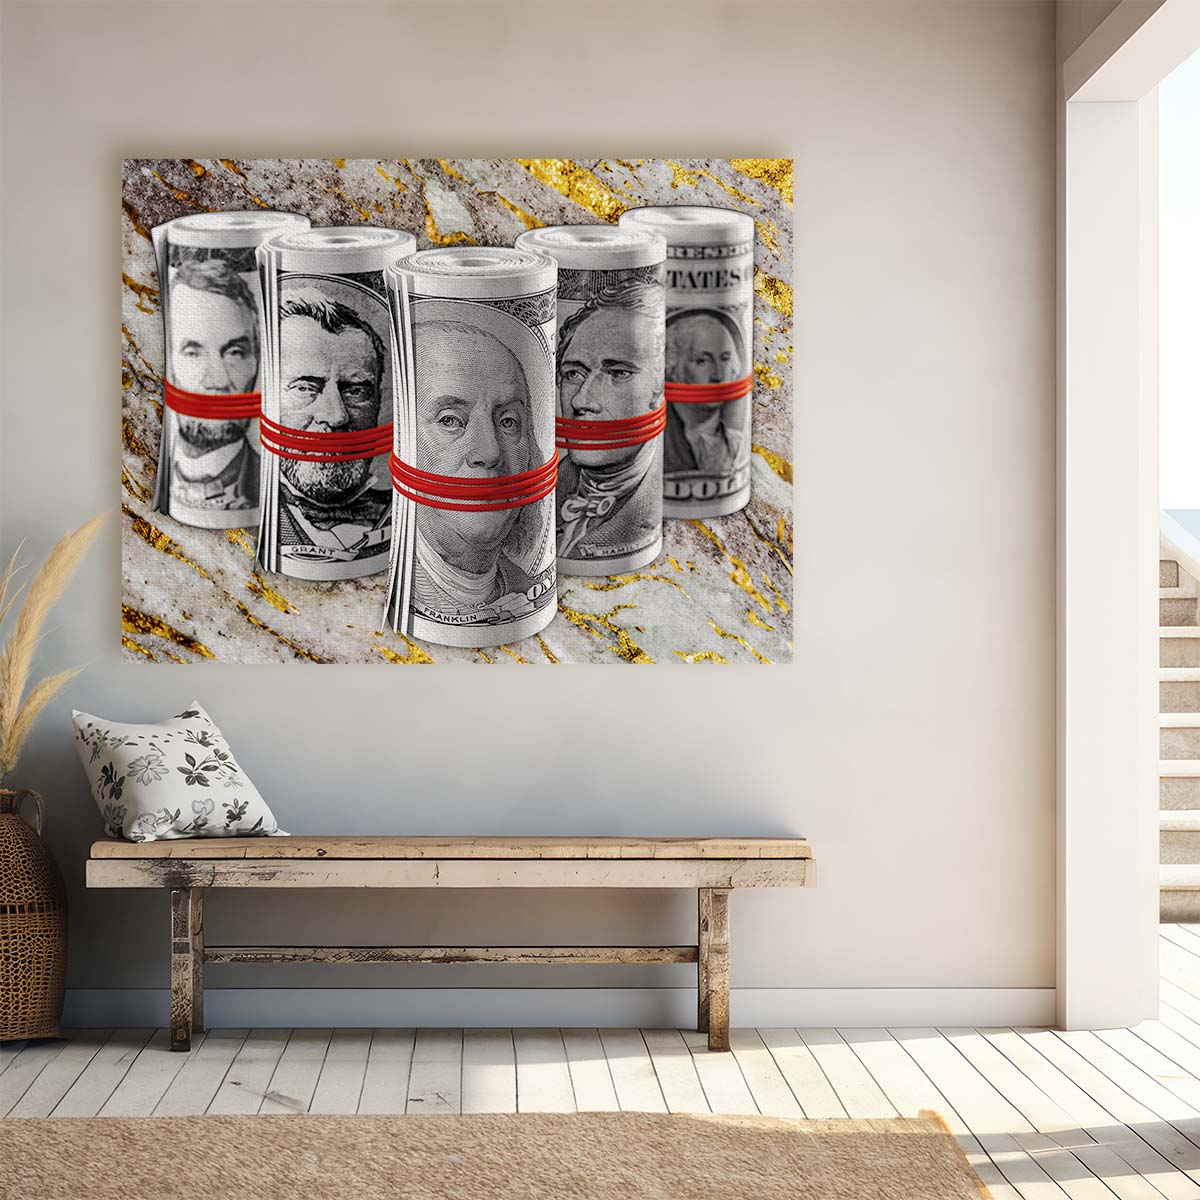 Presidents for Ransom American Dollar Roll Wall Art by Luxuriance Designs. Made in USA.